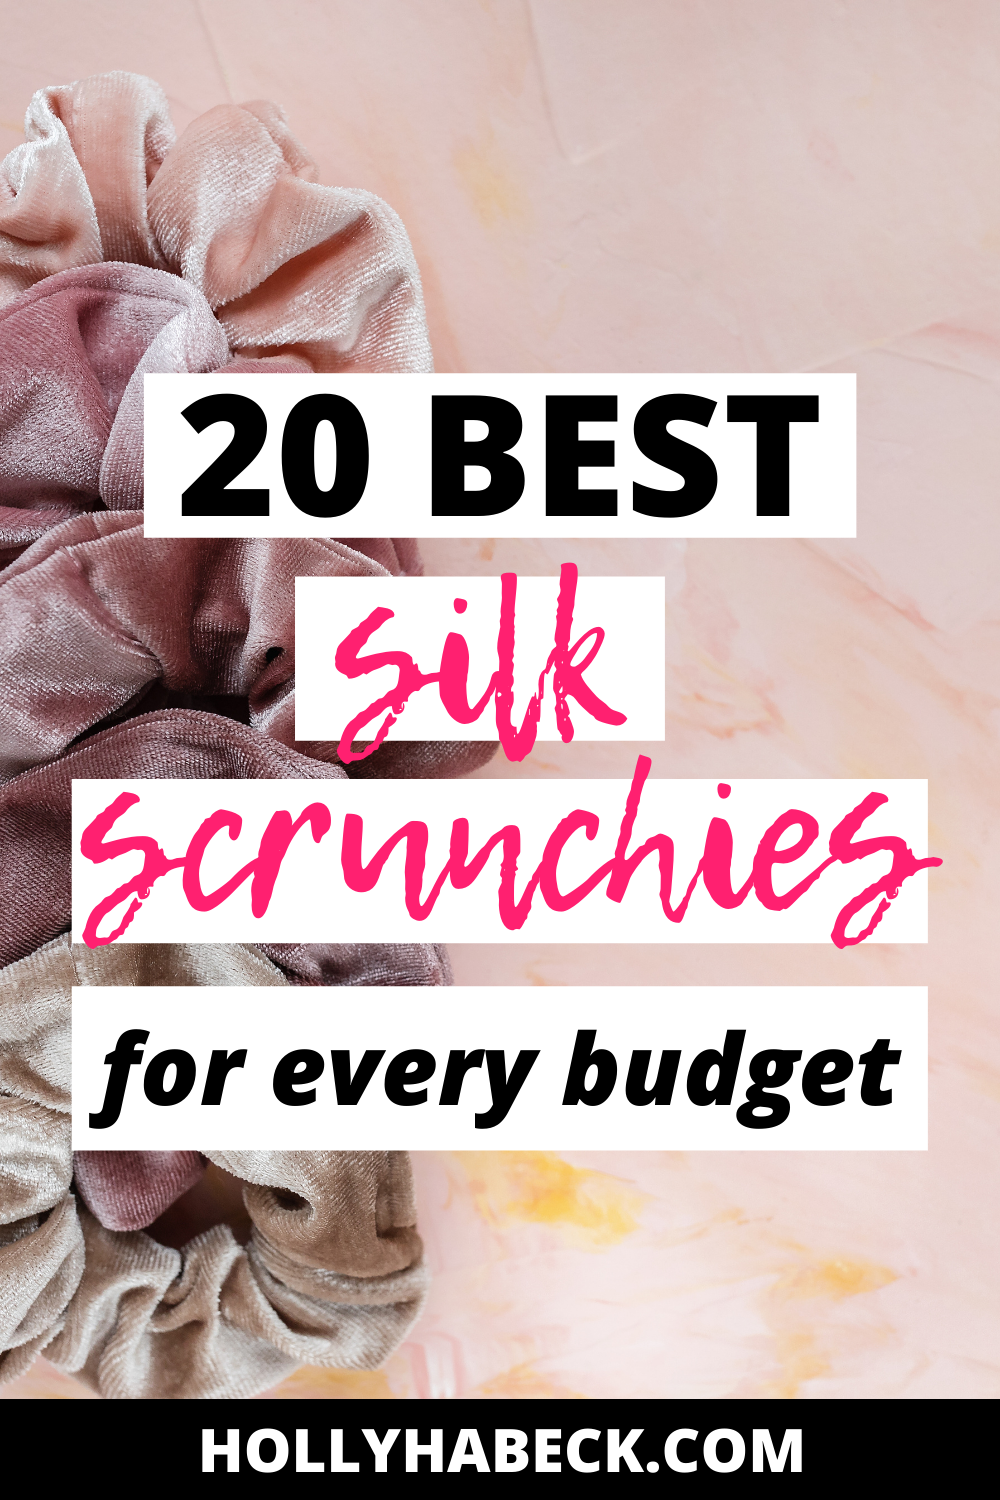 20 Best Silk Scrunchies for Every Budget